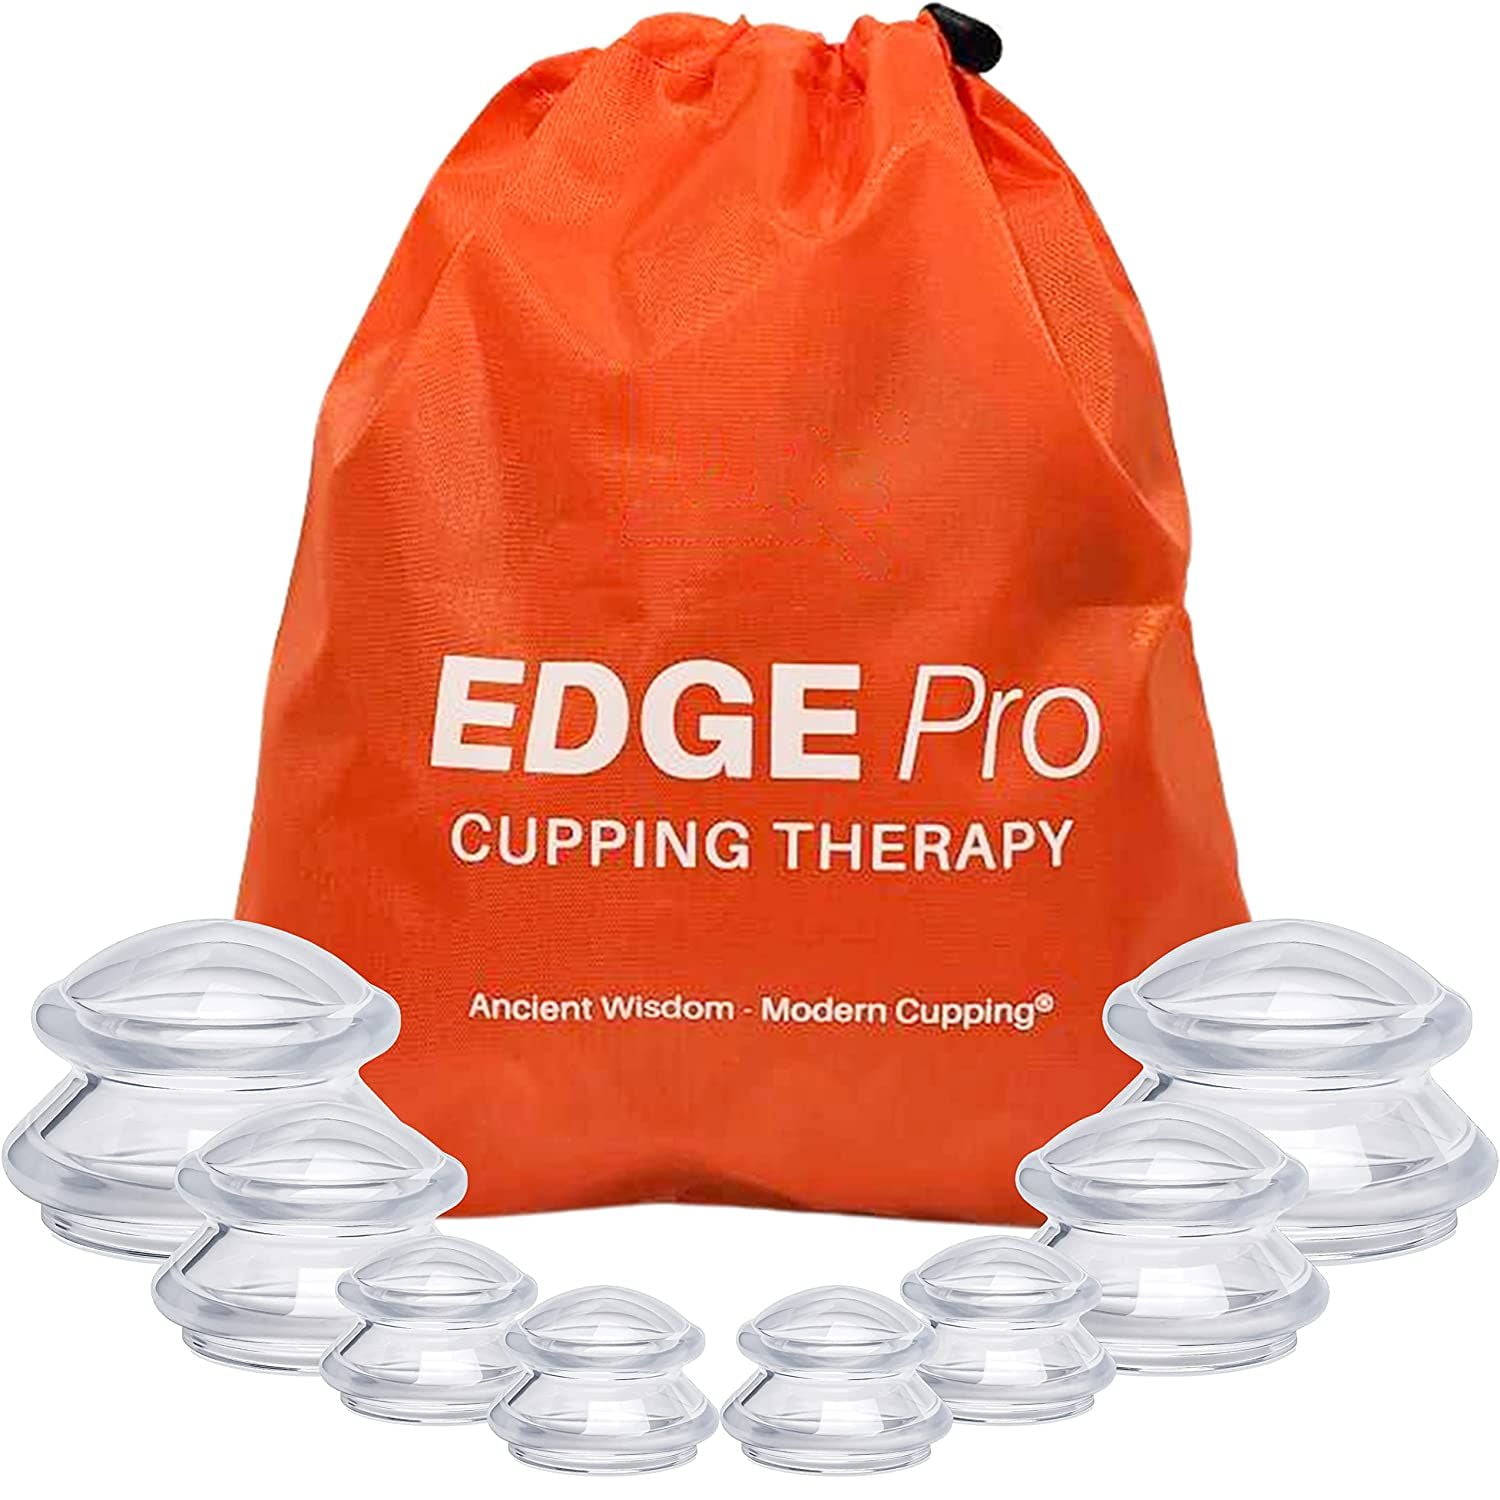 LURE Essentials Edge Cupping Set – Ultra Clear Silicone Cupping